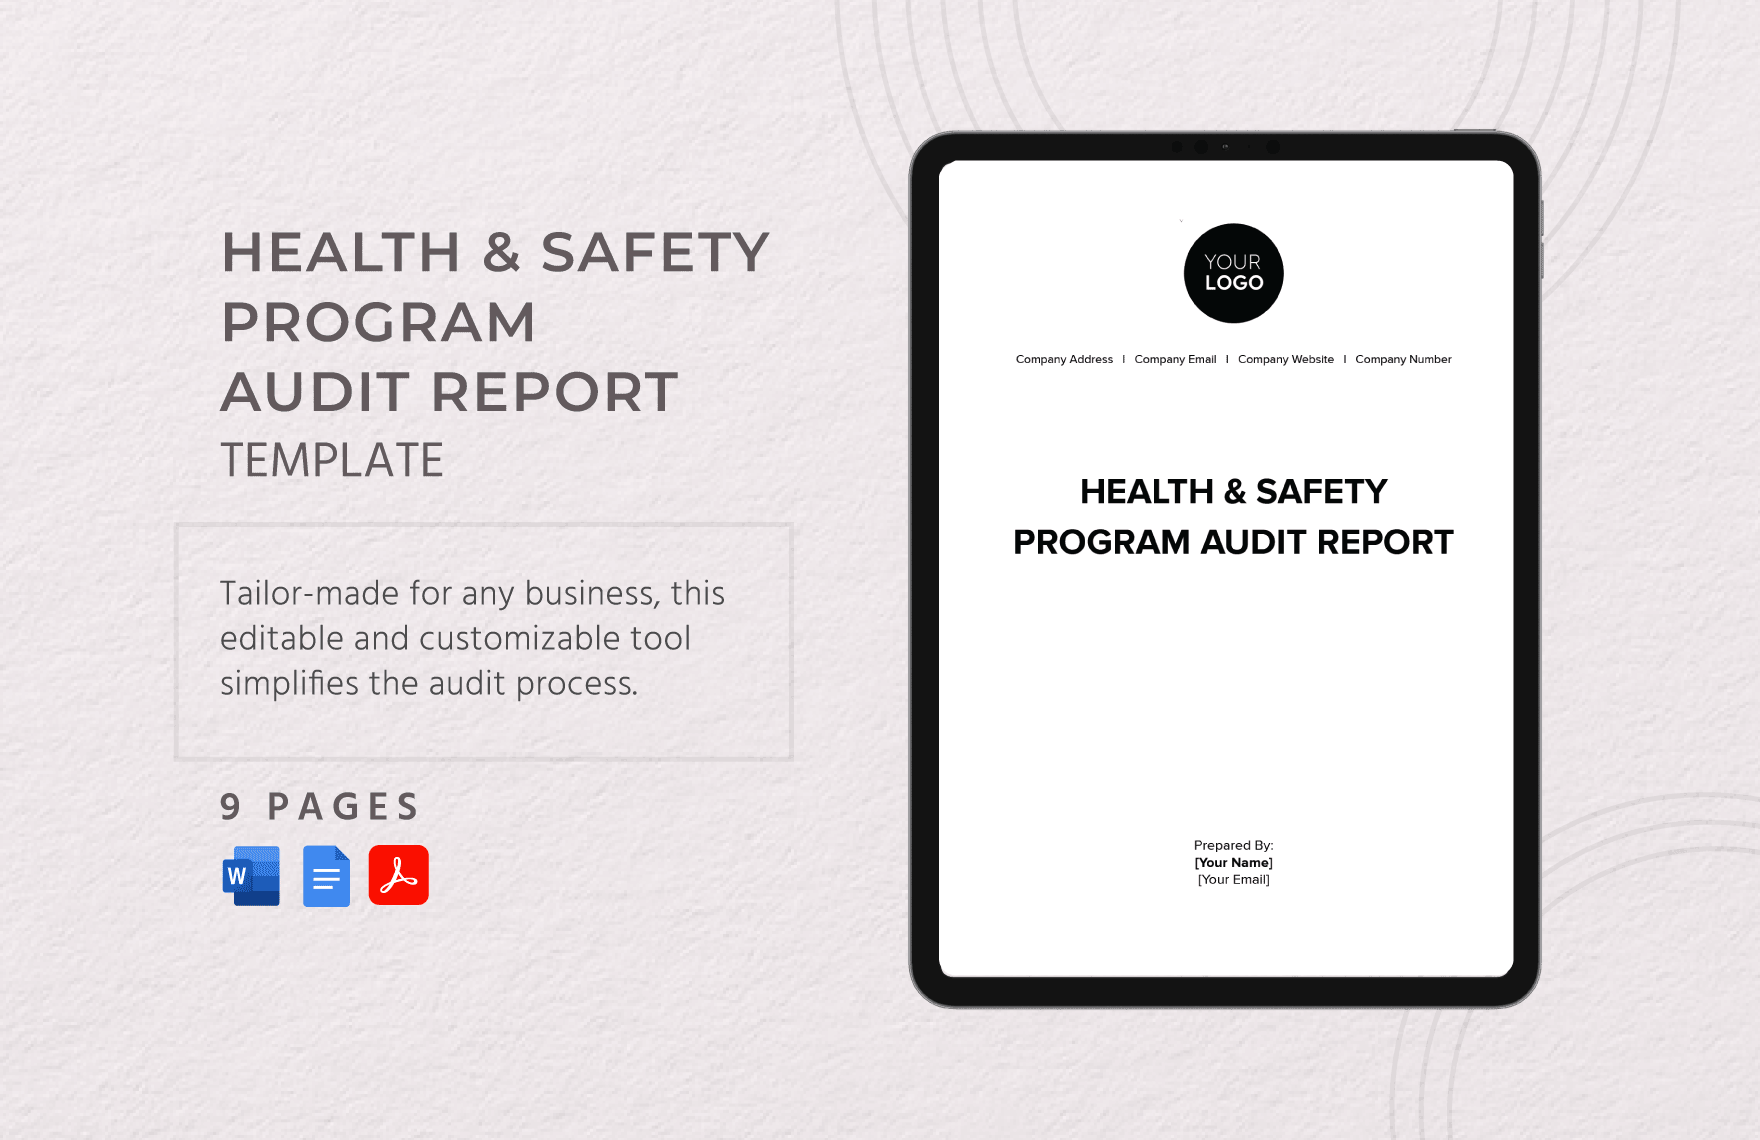 Health & Safety Program Audit Report Template